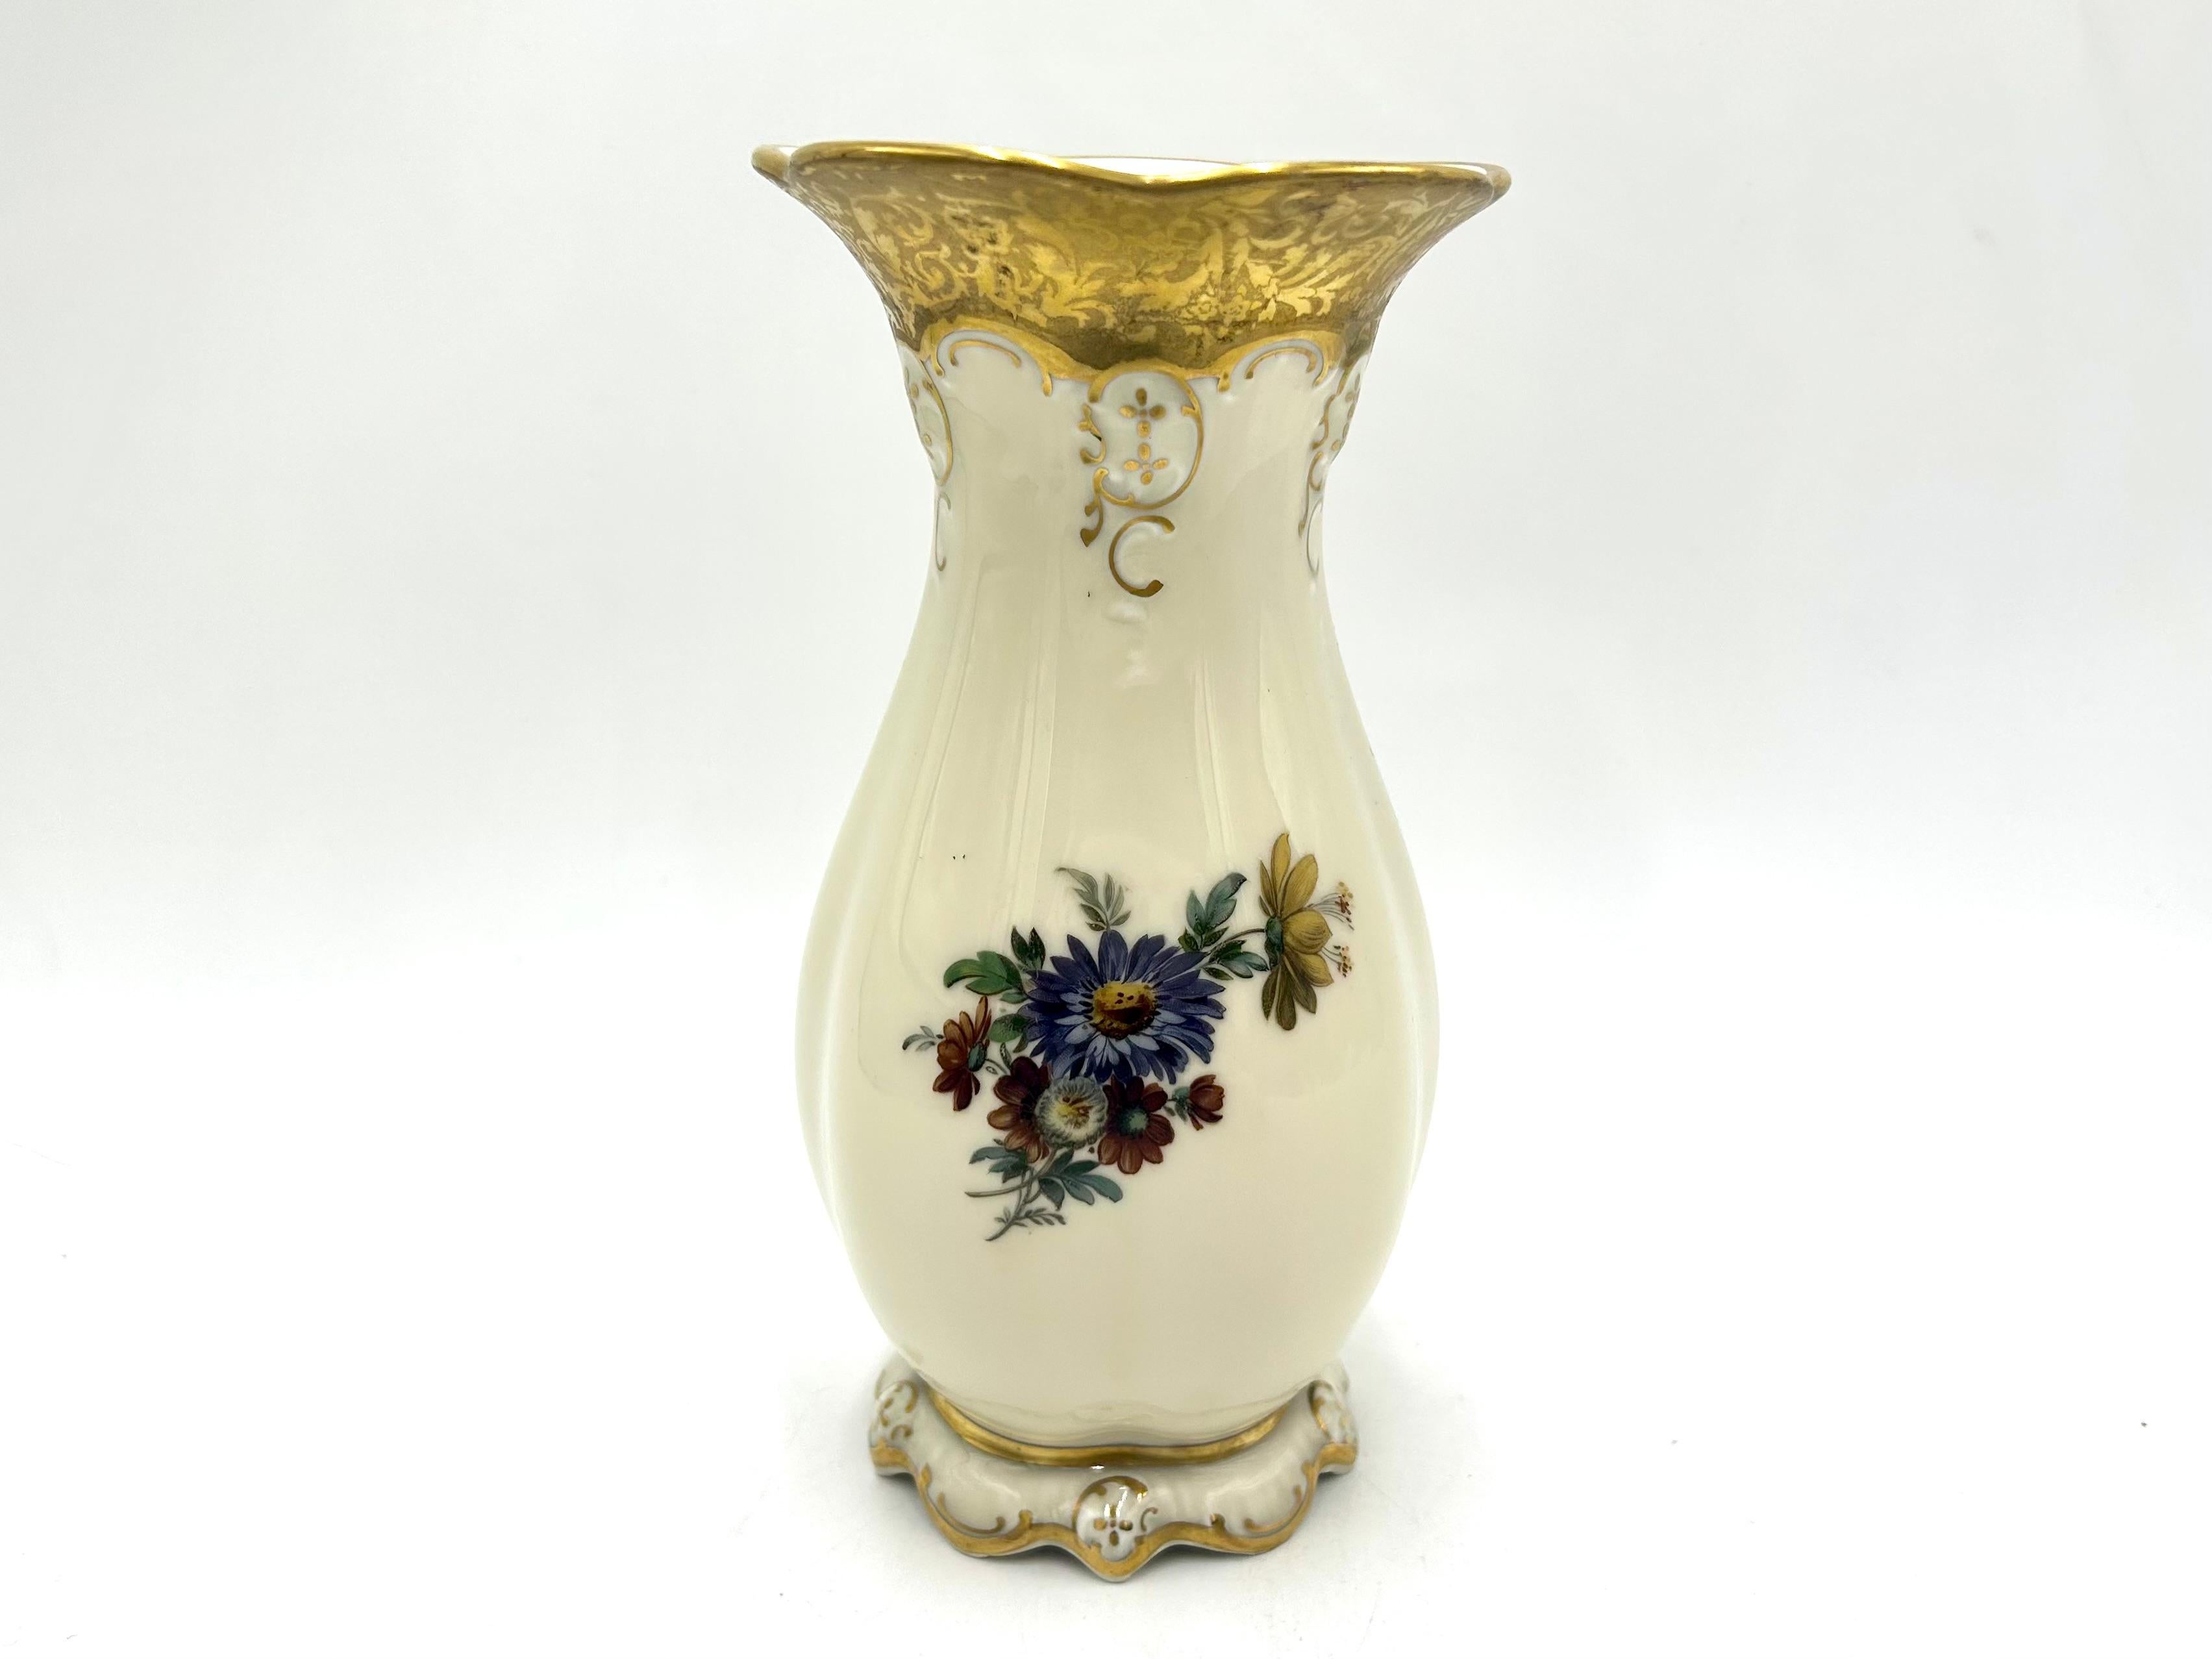 Porcelain vase made of ecru porcelain, decorated with gilding and a bouquet of flowers. Made in Germany by the valued Rosenthal label, Moliere series. Signed with a mark used in the years 1938-1952. Very good condition, no damage.
Height: